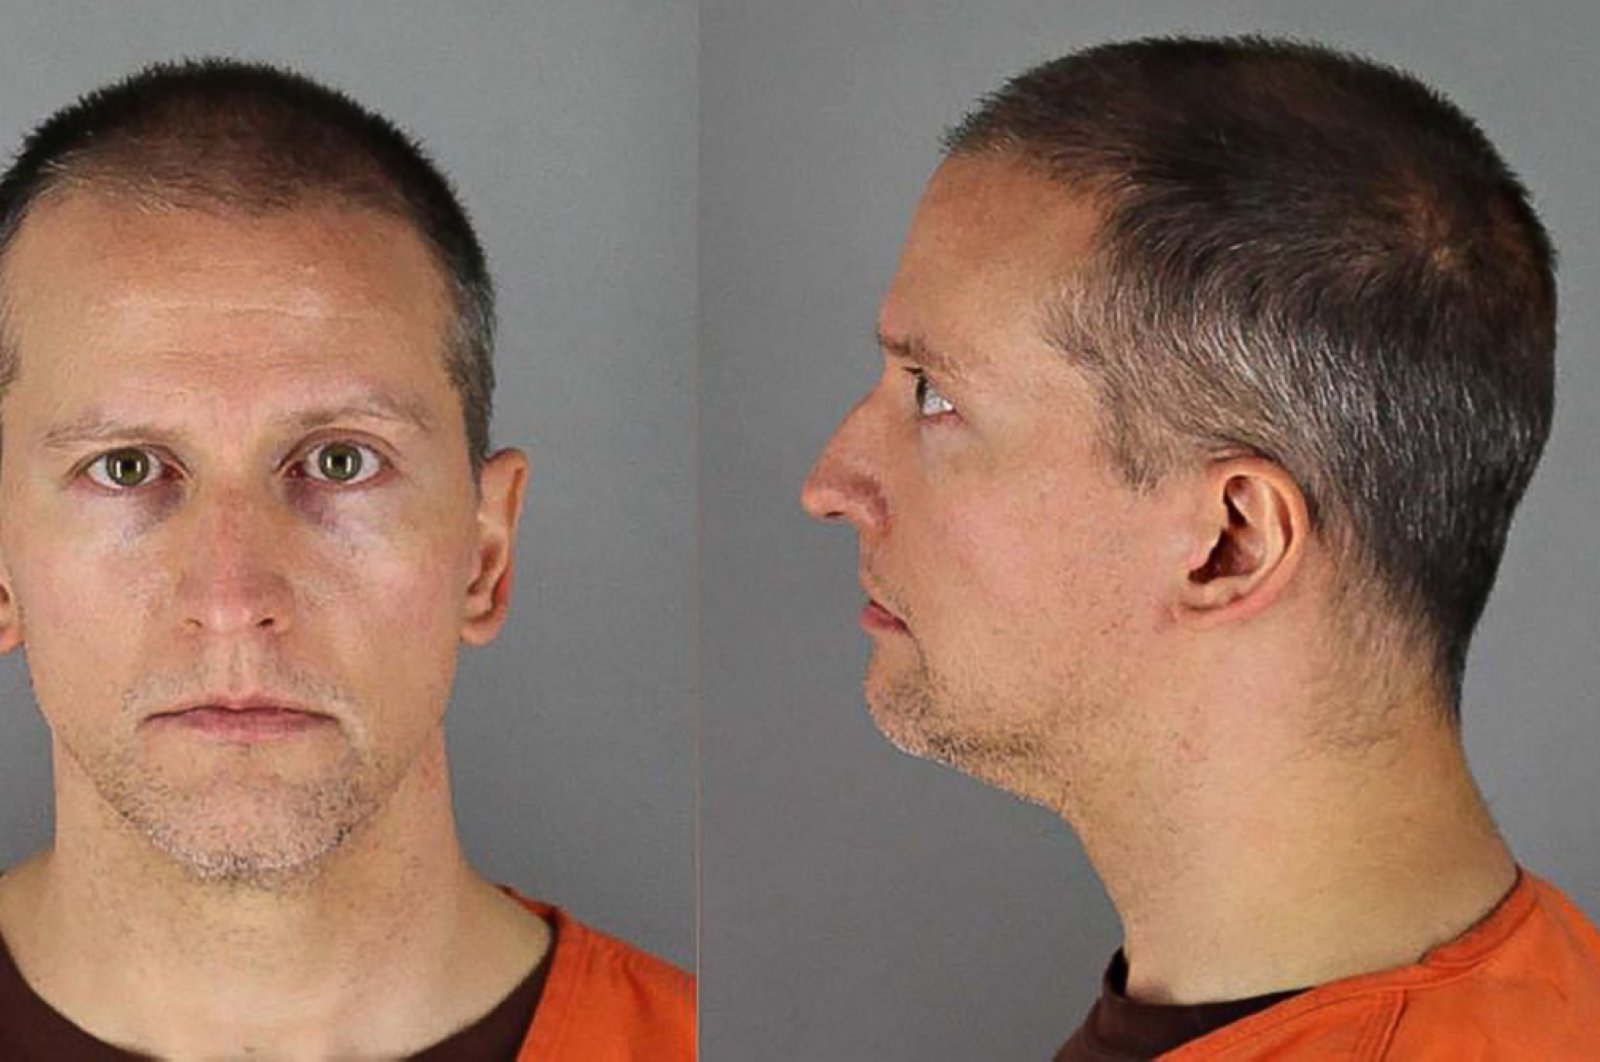 Derek Michael Chauvin is seen being held for sentencing in this handout photo obtained May 31, 2020, courtesy of the Hennepin County Jail. (AFP Photo)